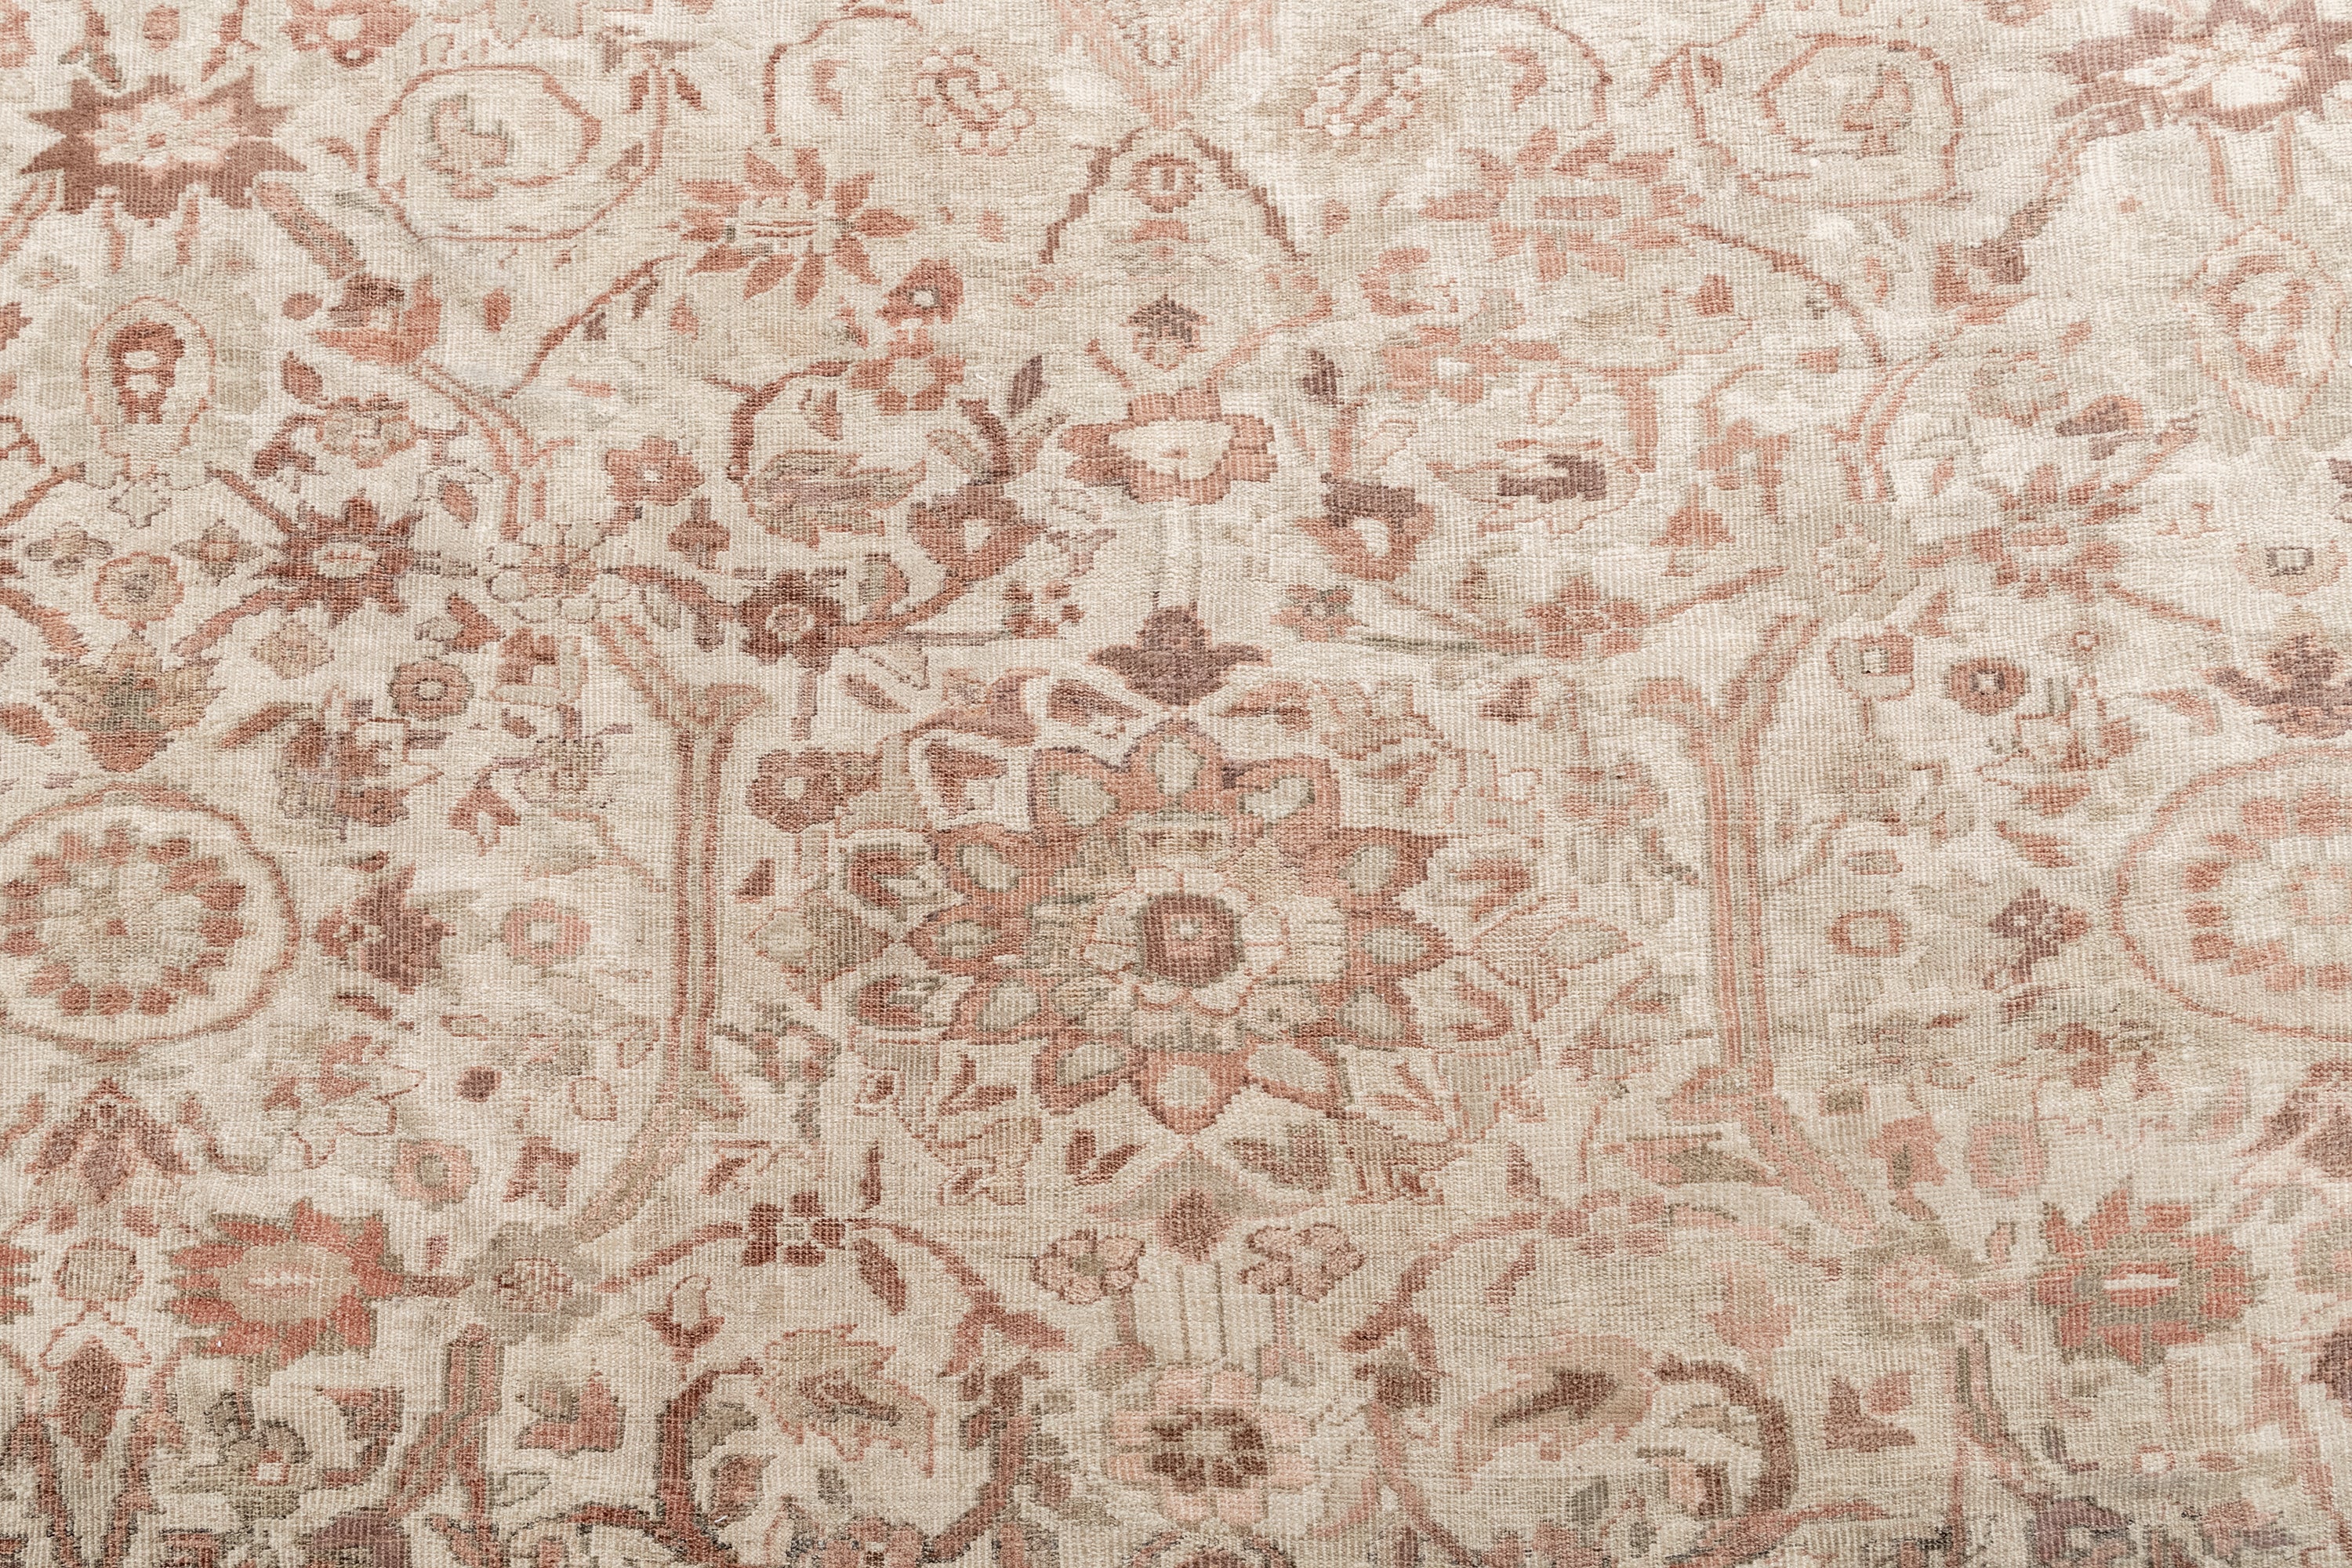 SULTANABAD RUG, AR31072/7322, WEST PERSIA, 13'7" X 19'8" - thumbnail 7